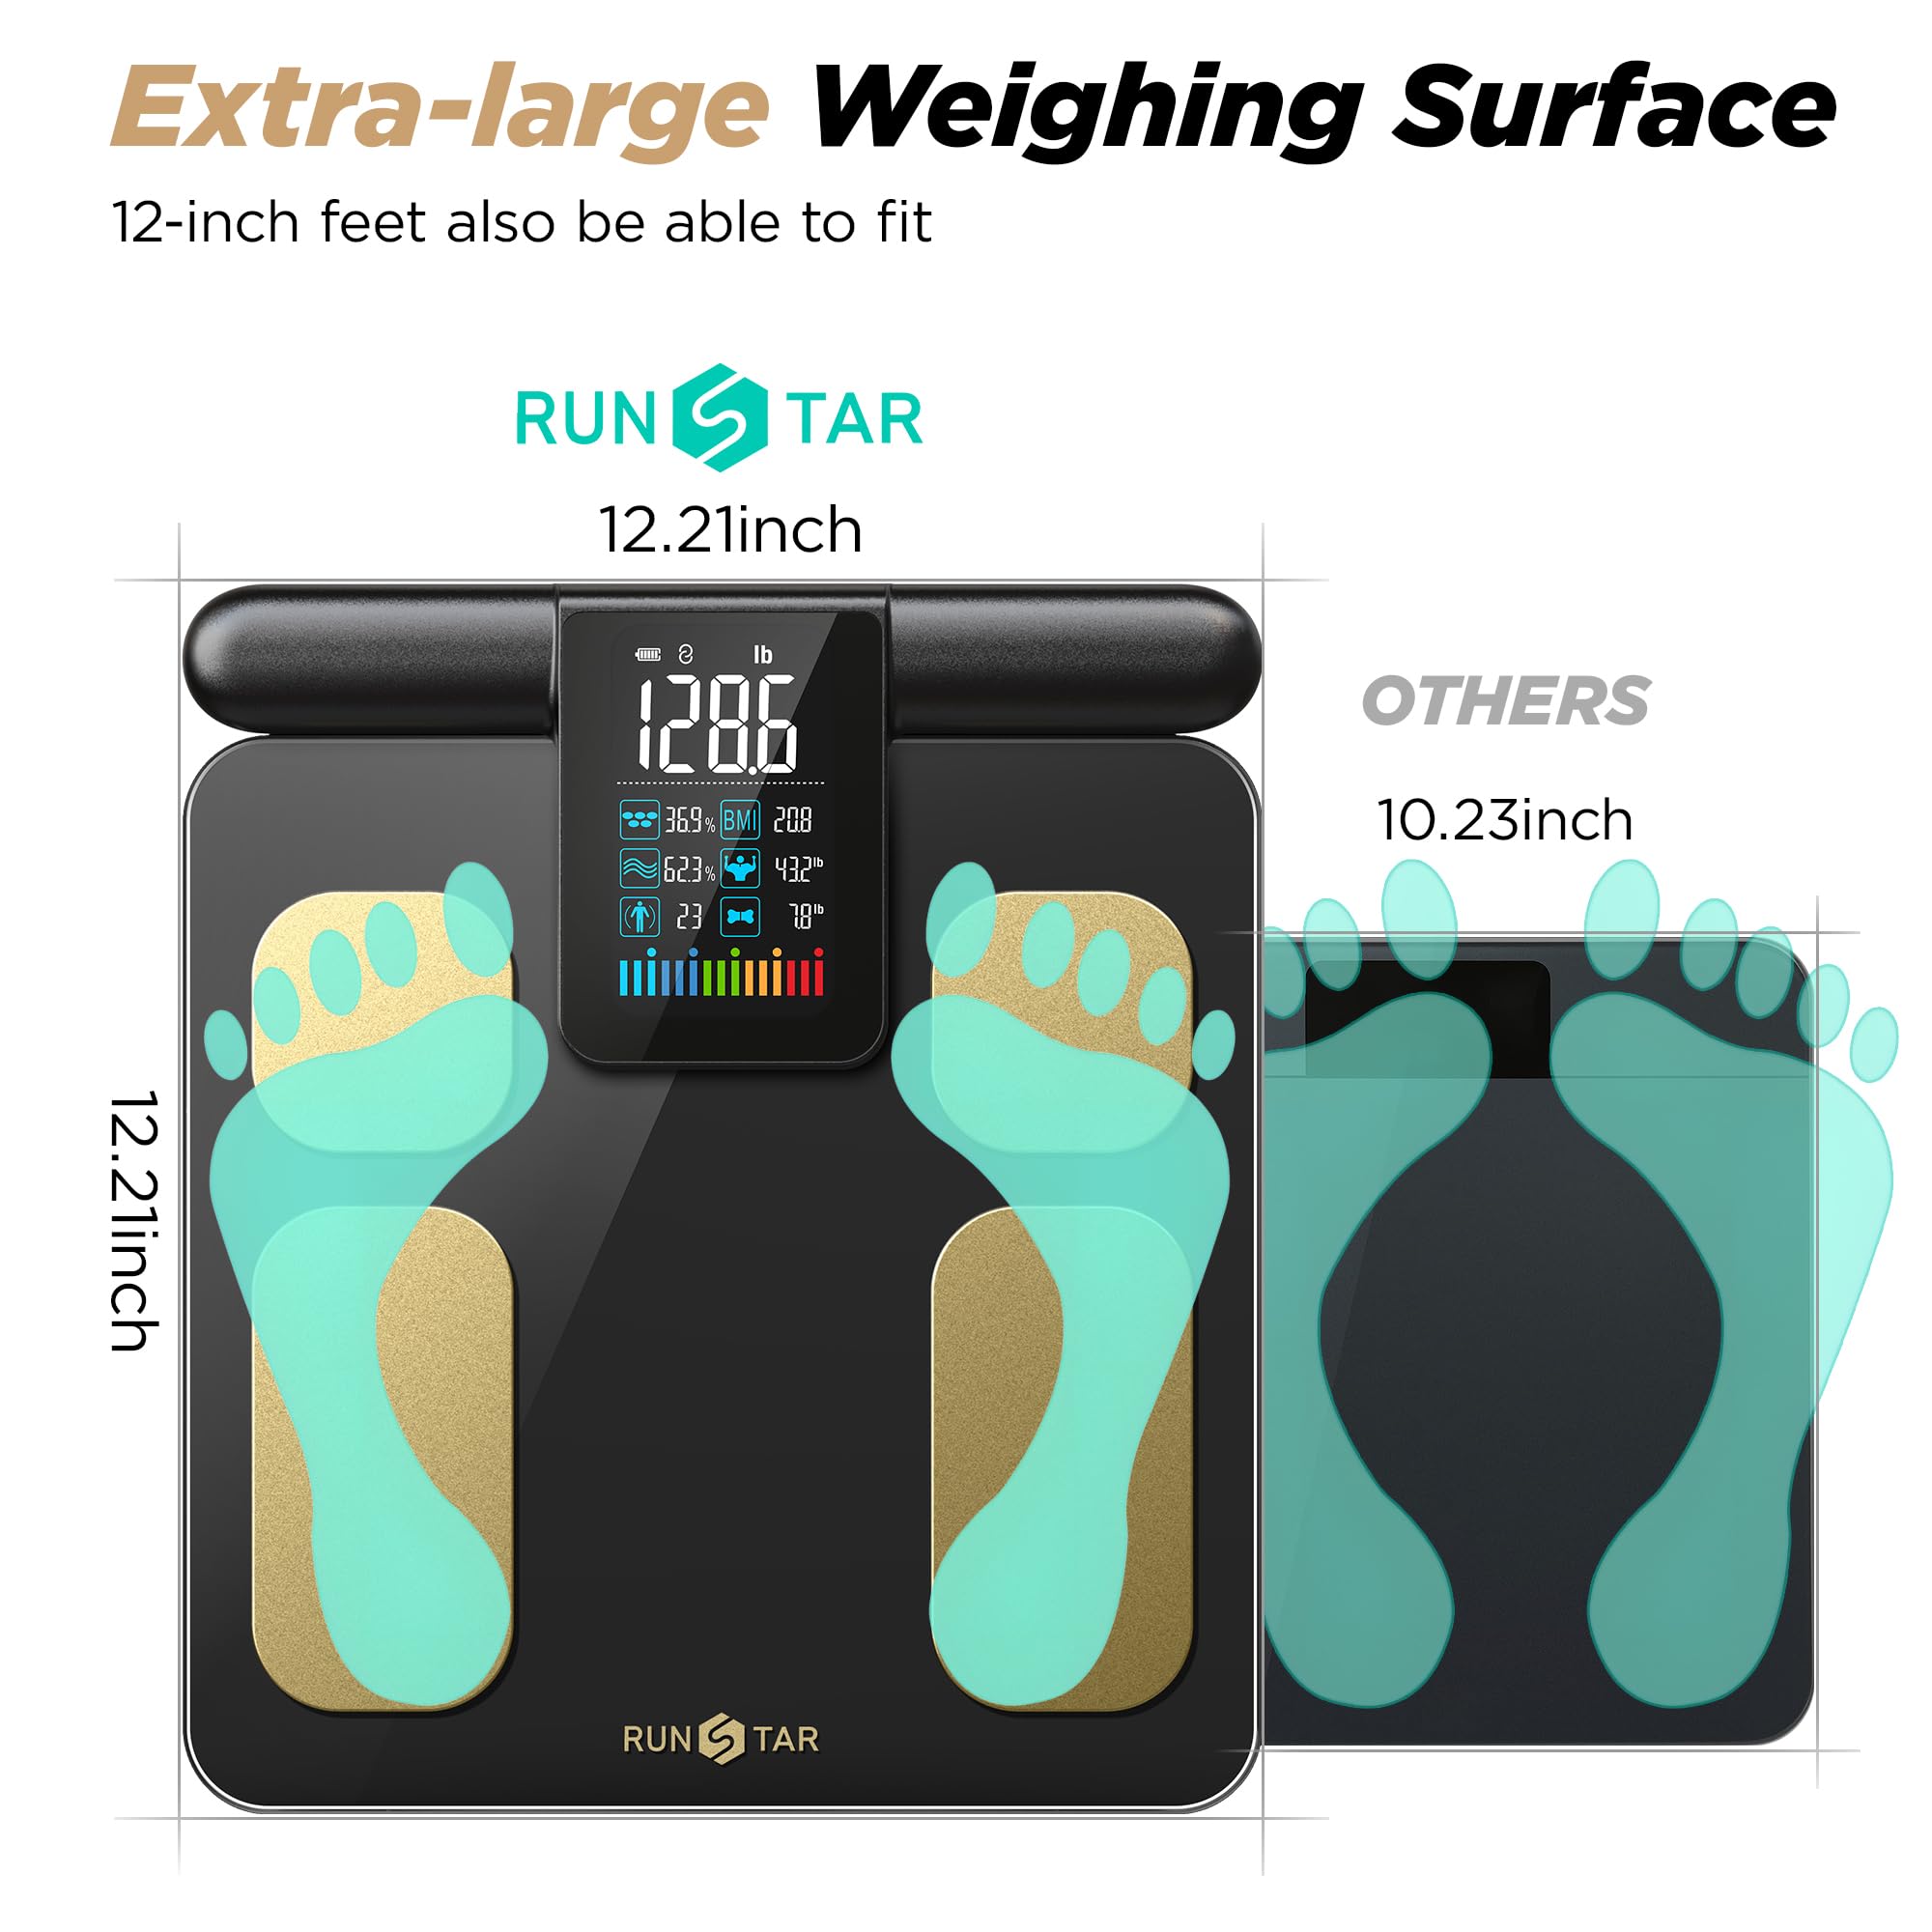 Runstar Scale for Body Weight and Fat Percentage, 8 Electrodes High Precision Digital Scale for BMI 20 Body Composition Measurement, Bathroom Smart Scales with Large Color Display FSA or HSA Eligible